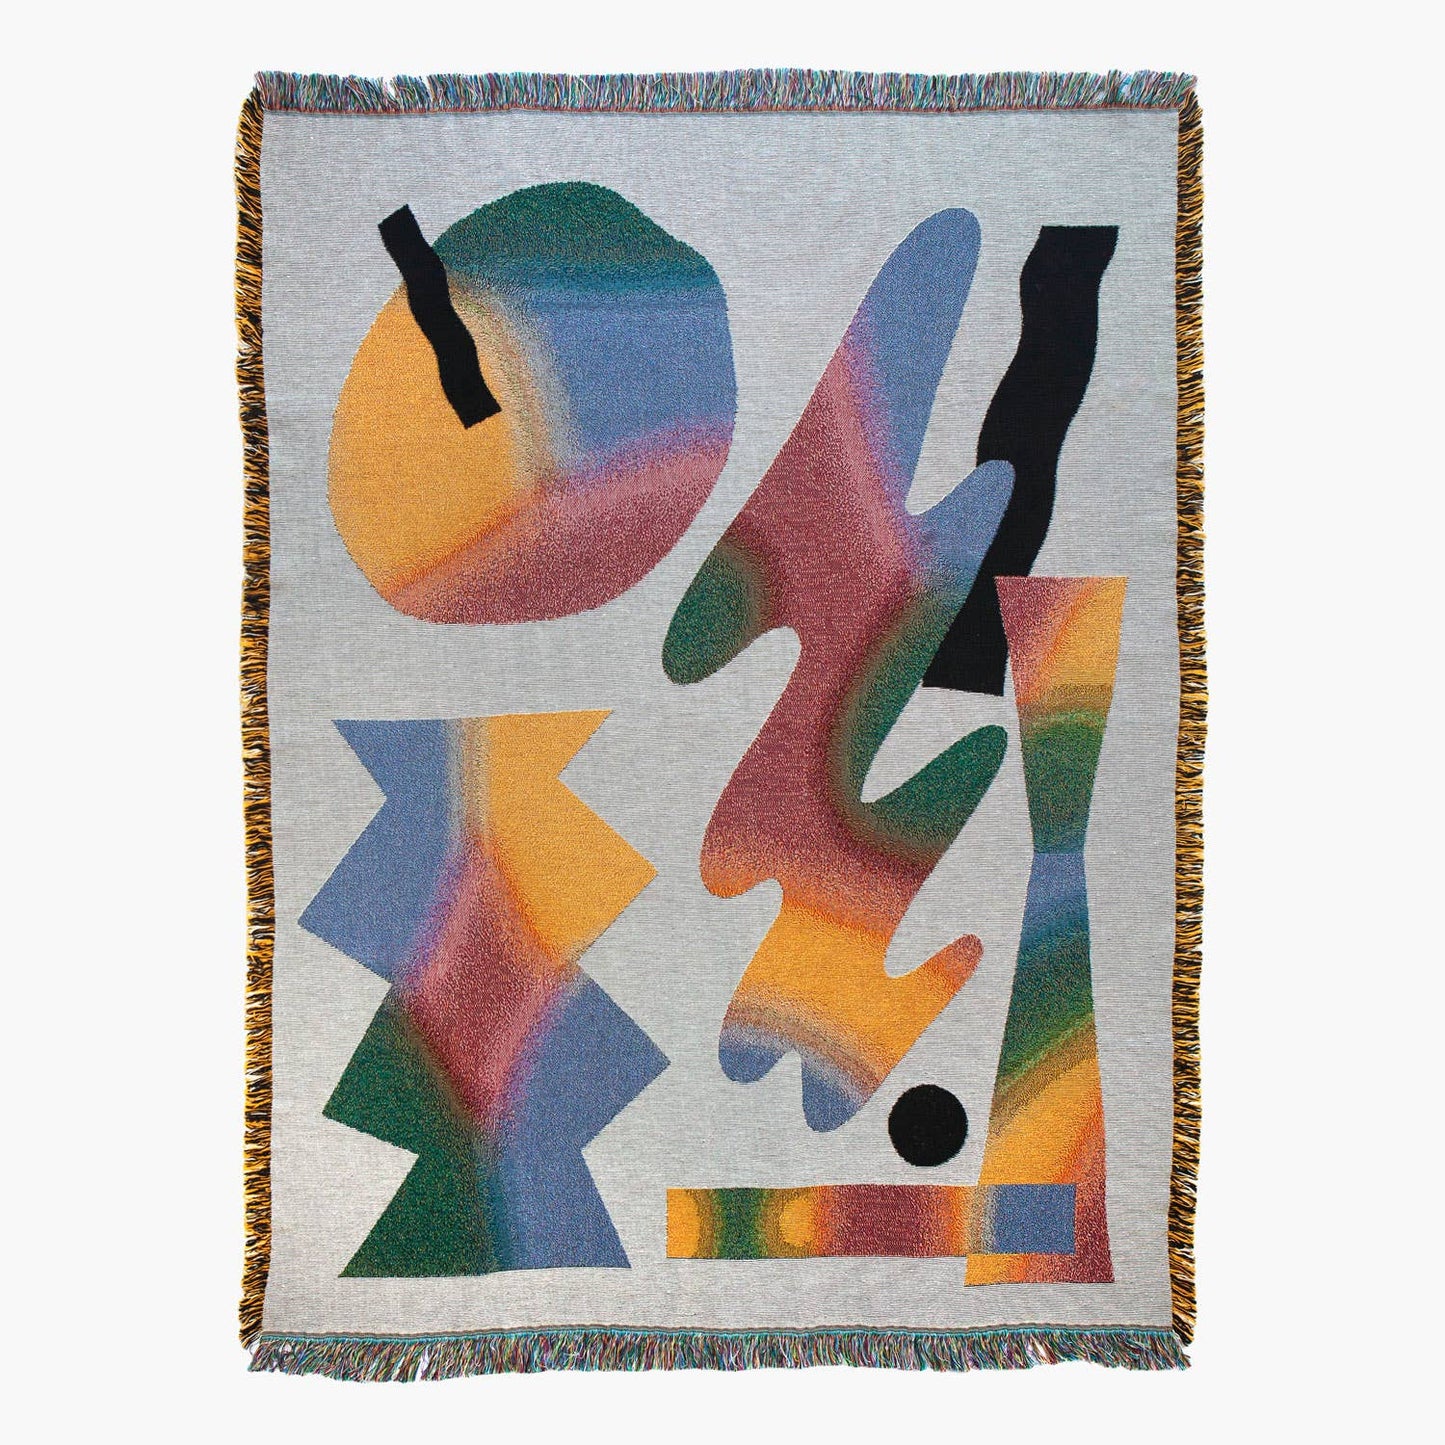 "Sampson" Throw by Slowdown Studio depicts an electric piece with watercolor spashes and abstract shapes. Jacquard woven